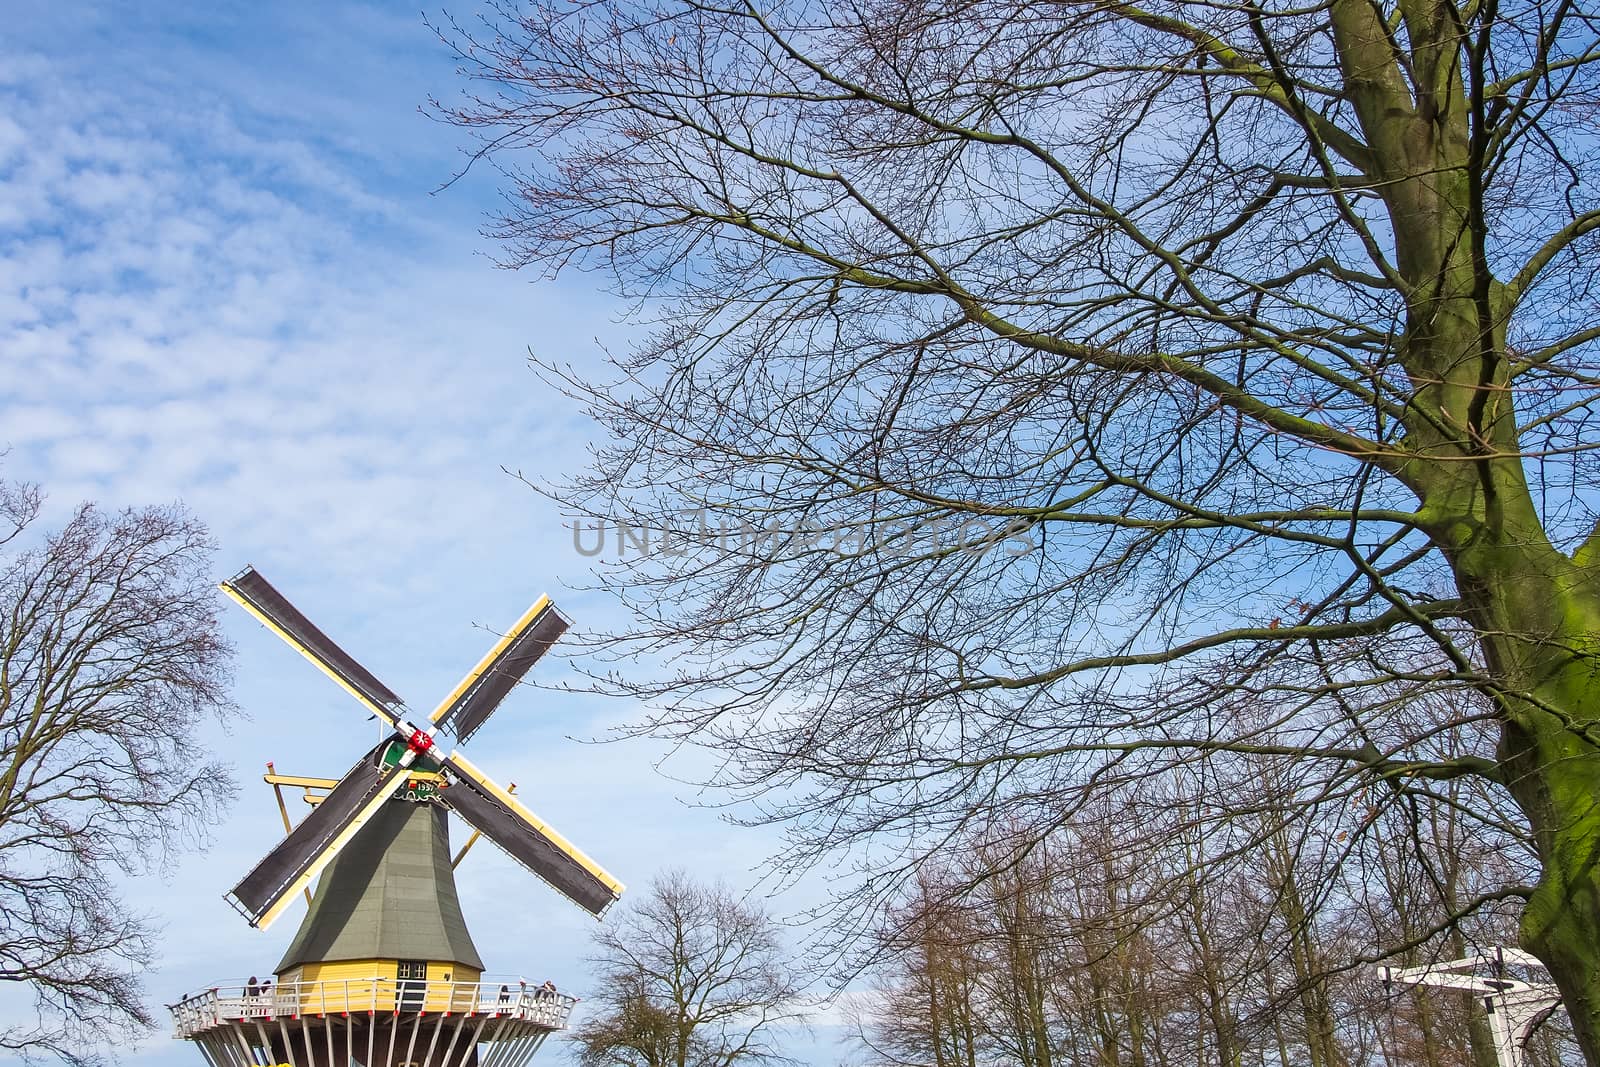 Dutch windmill and leafless trees in spring garden of flowers Keukenhof, Holland, Netherlands.